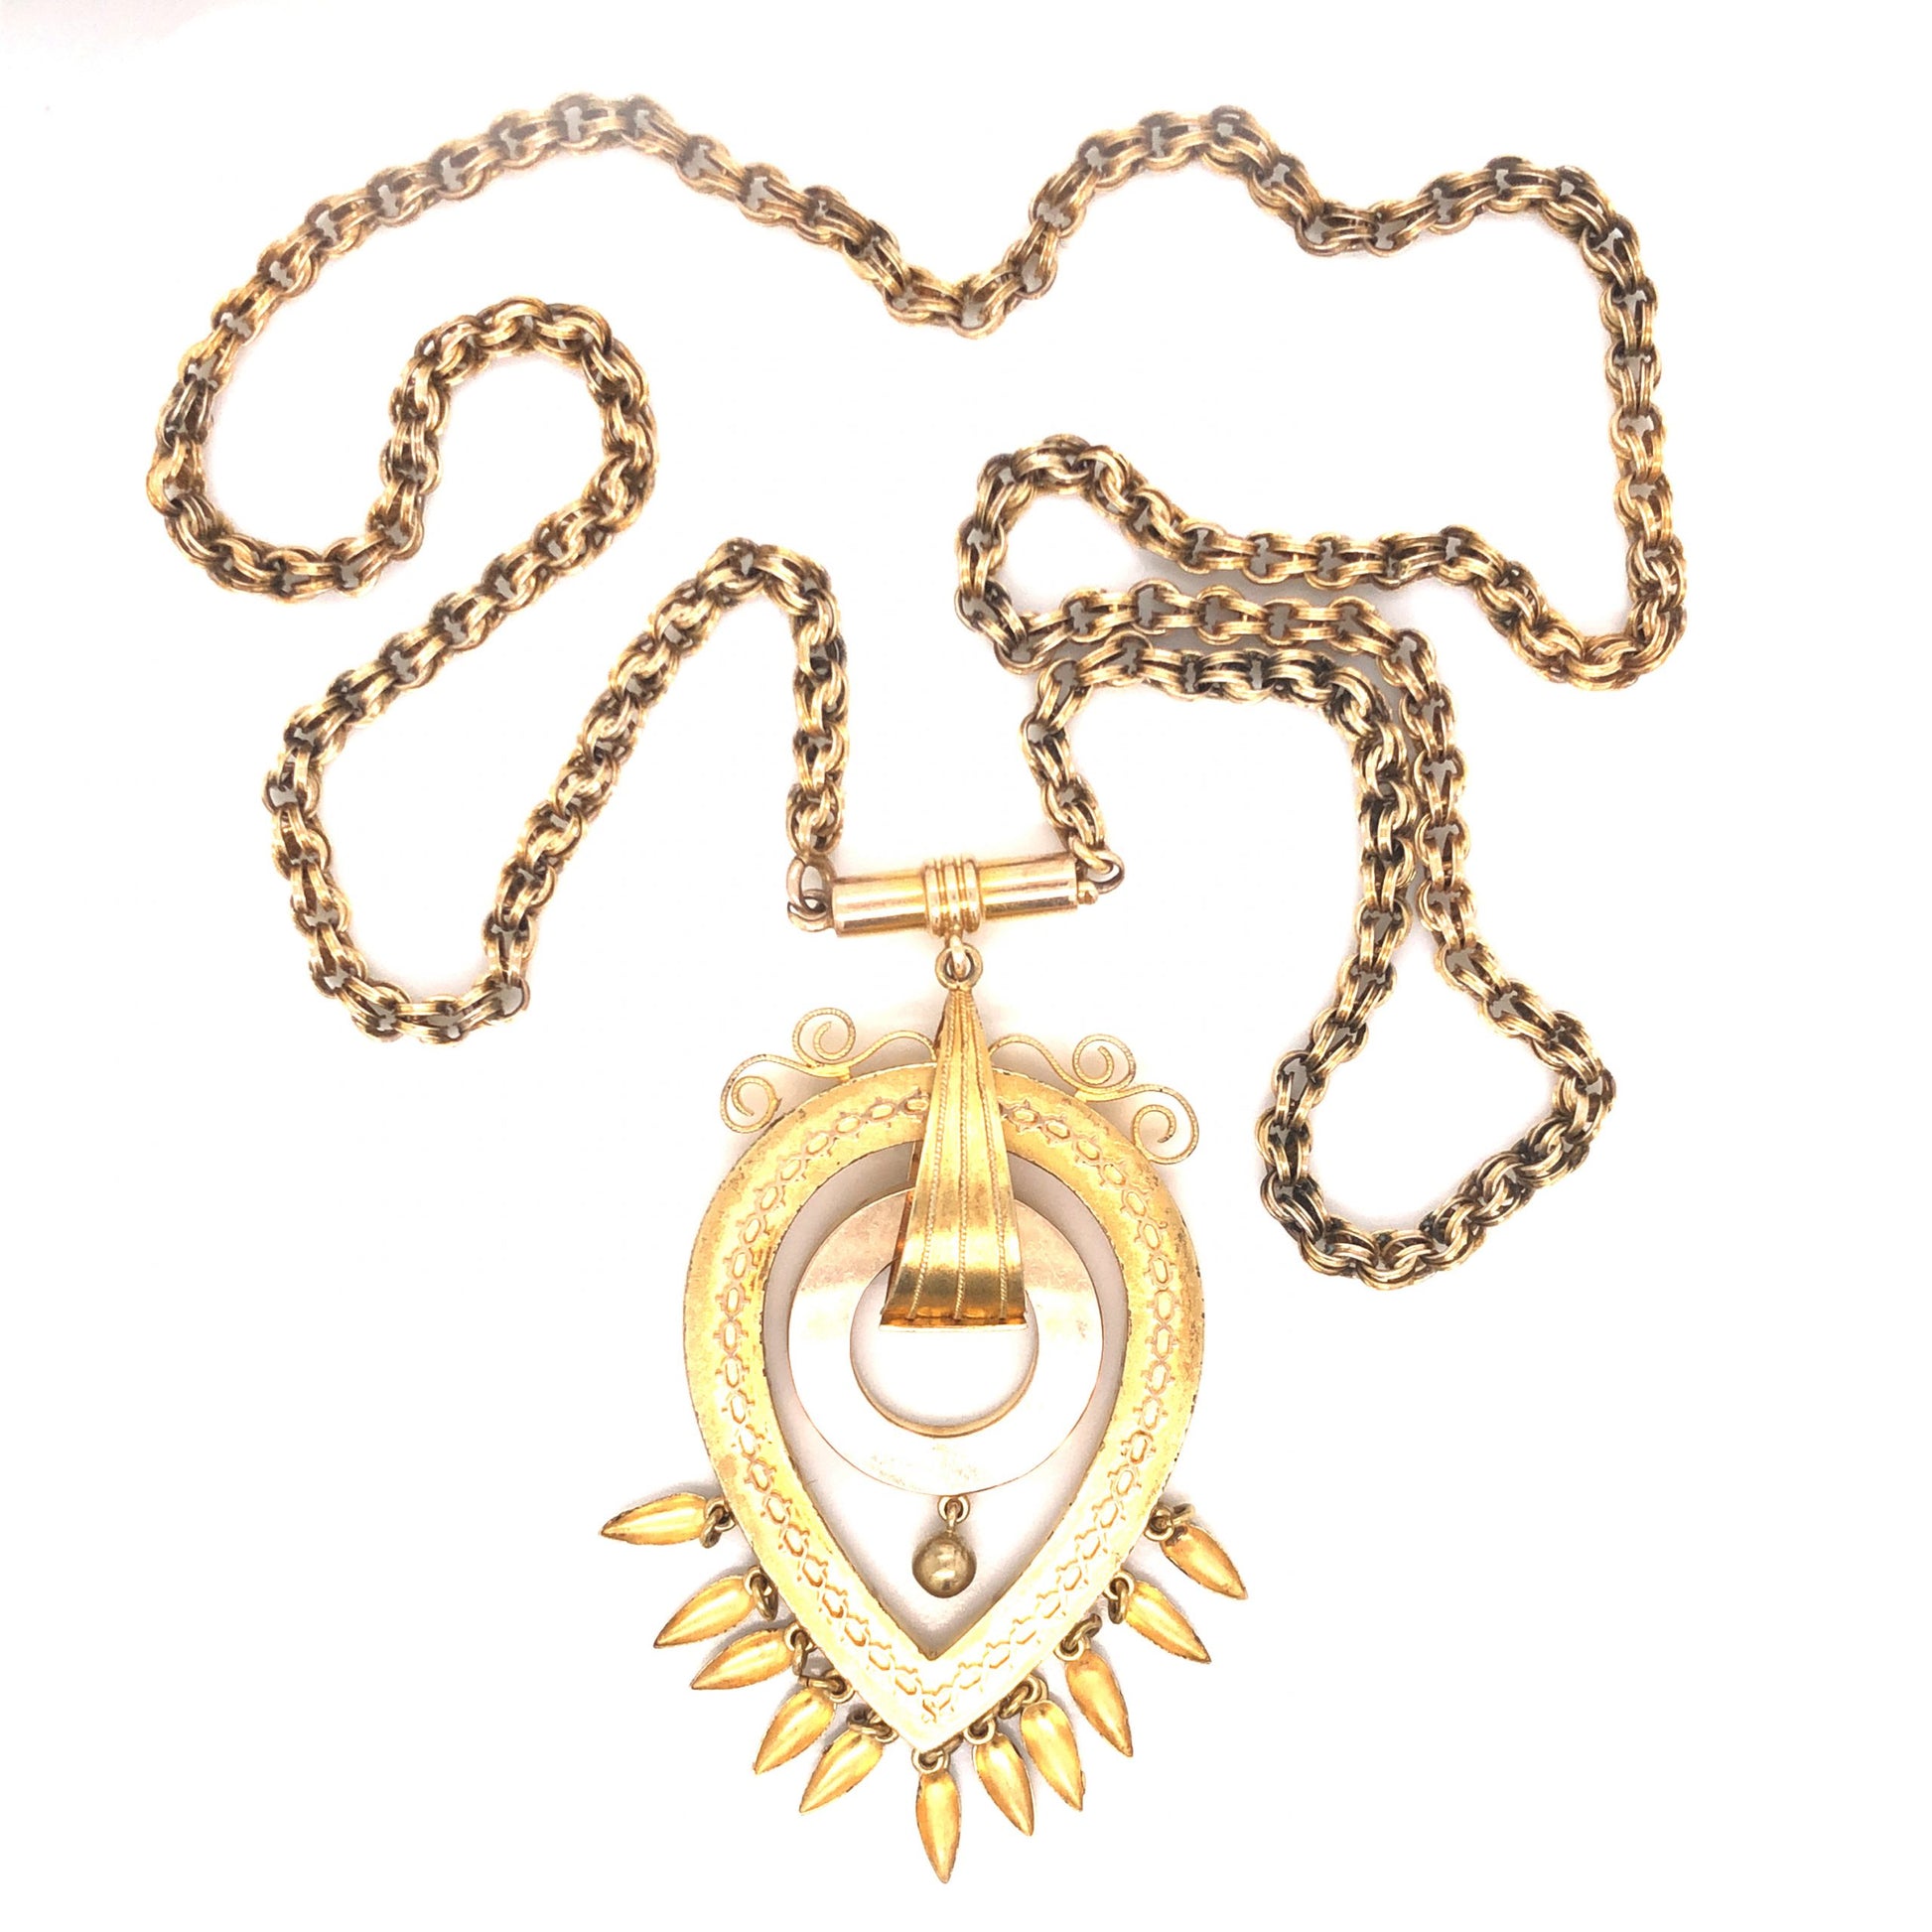 Victorian Ornate Pendant Necklace in 14k Yellow GoldComposition: 14 Karat Yellow GoldTotal Gram Weight: 18.7 g